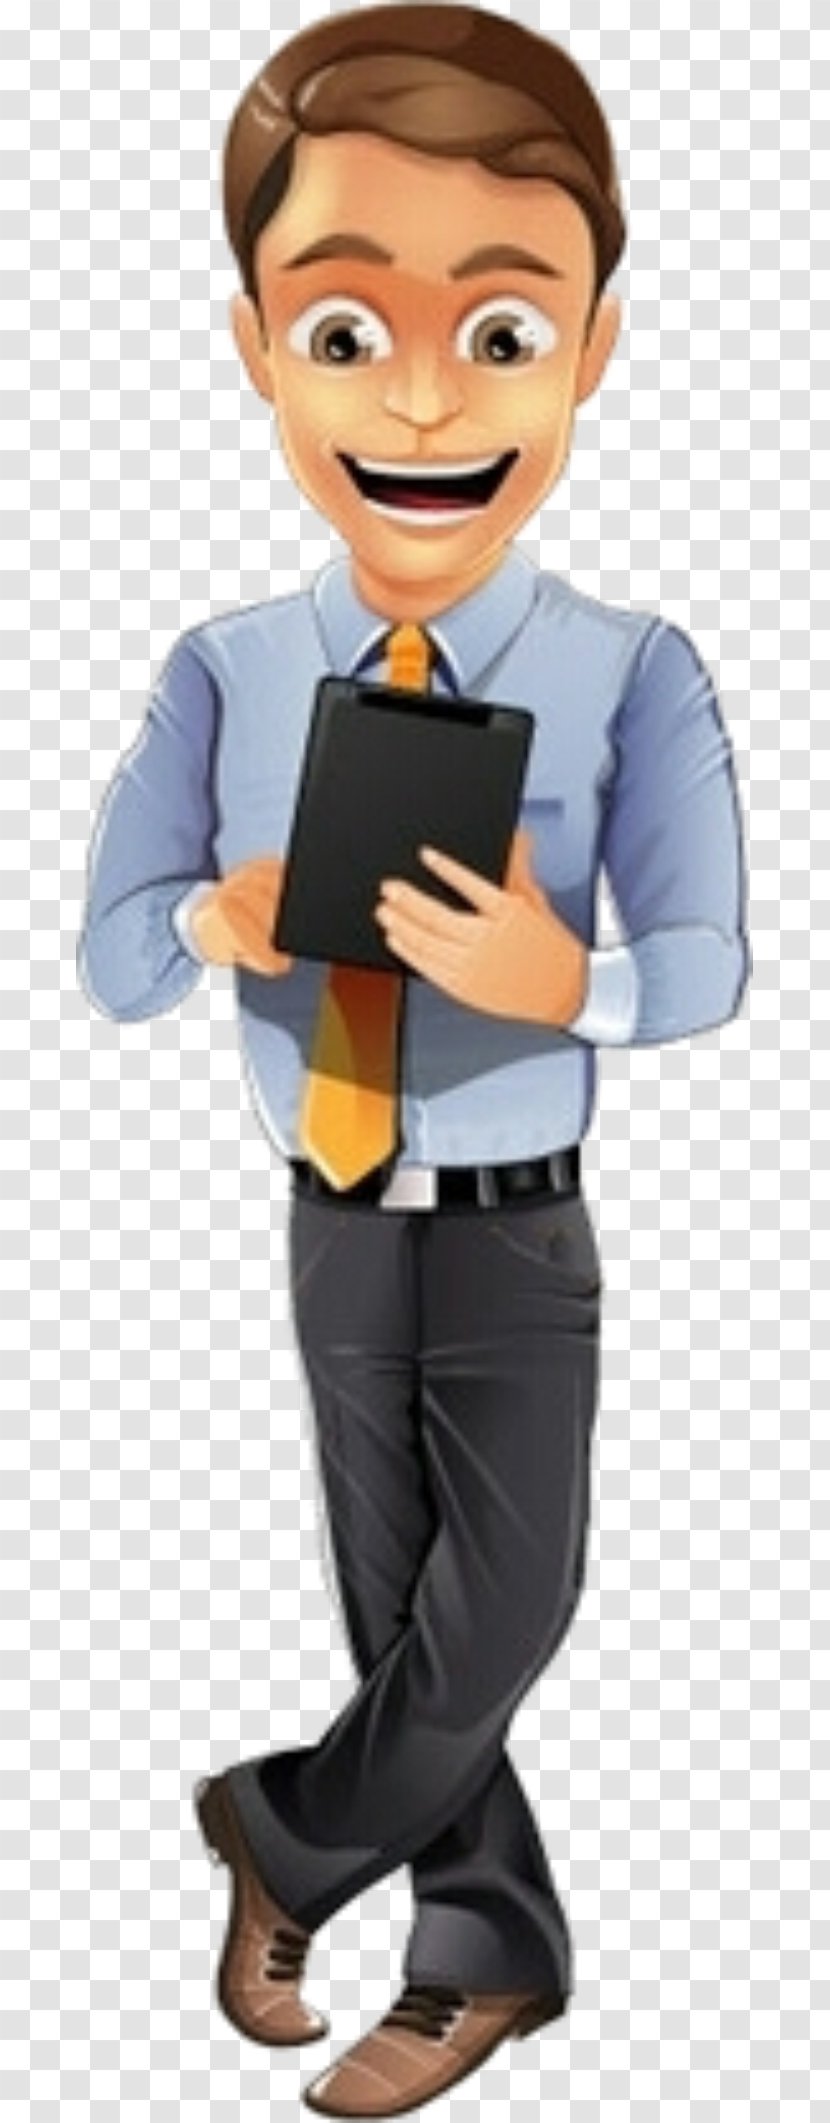 Businessperson Character - Profession Transparent PNG